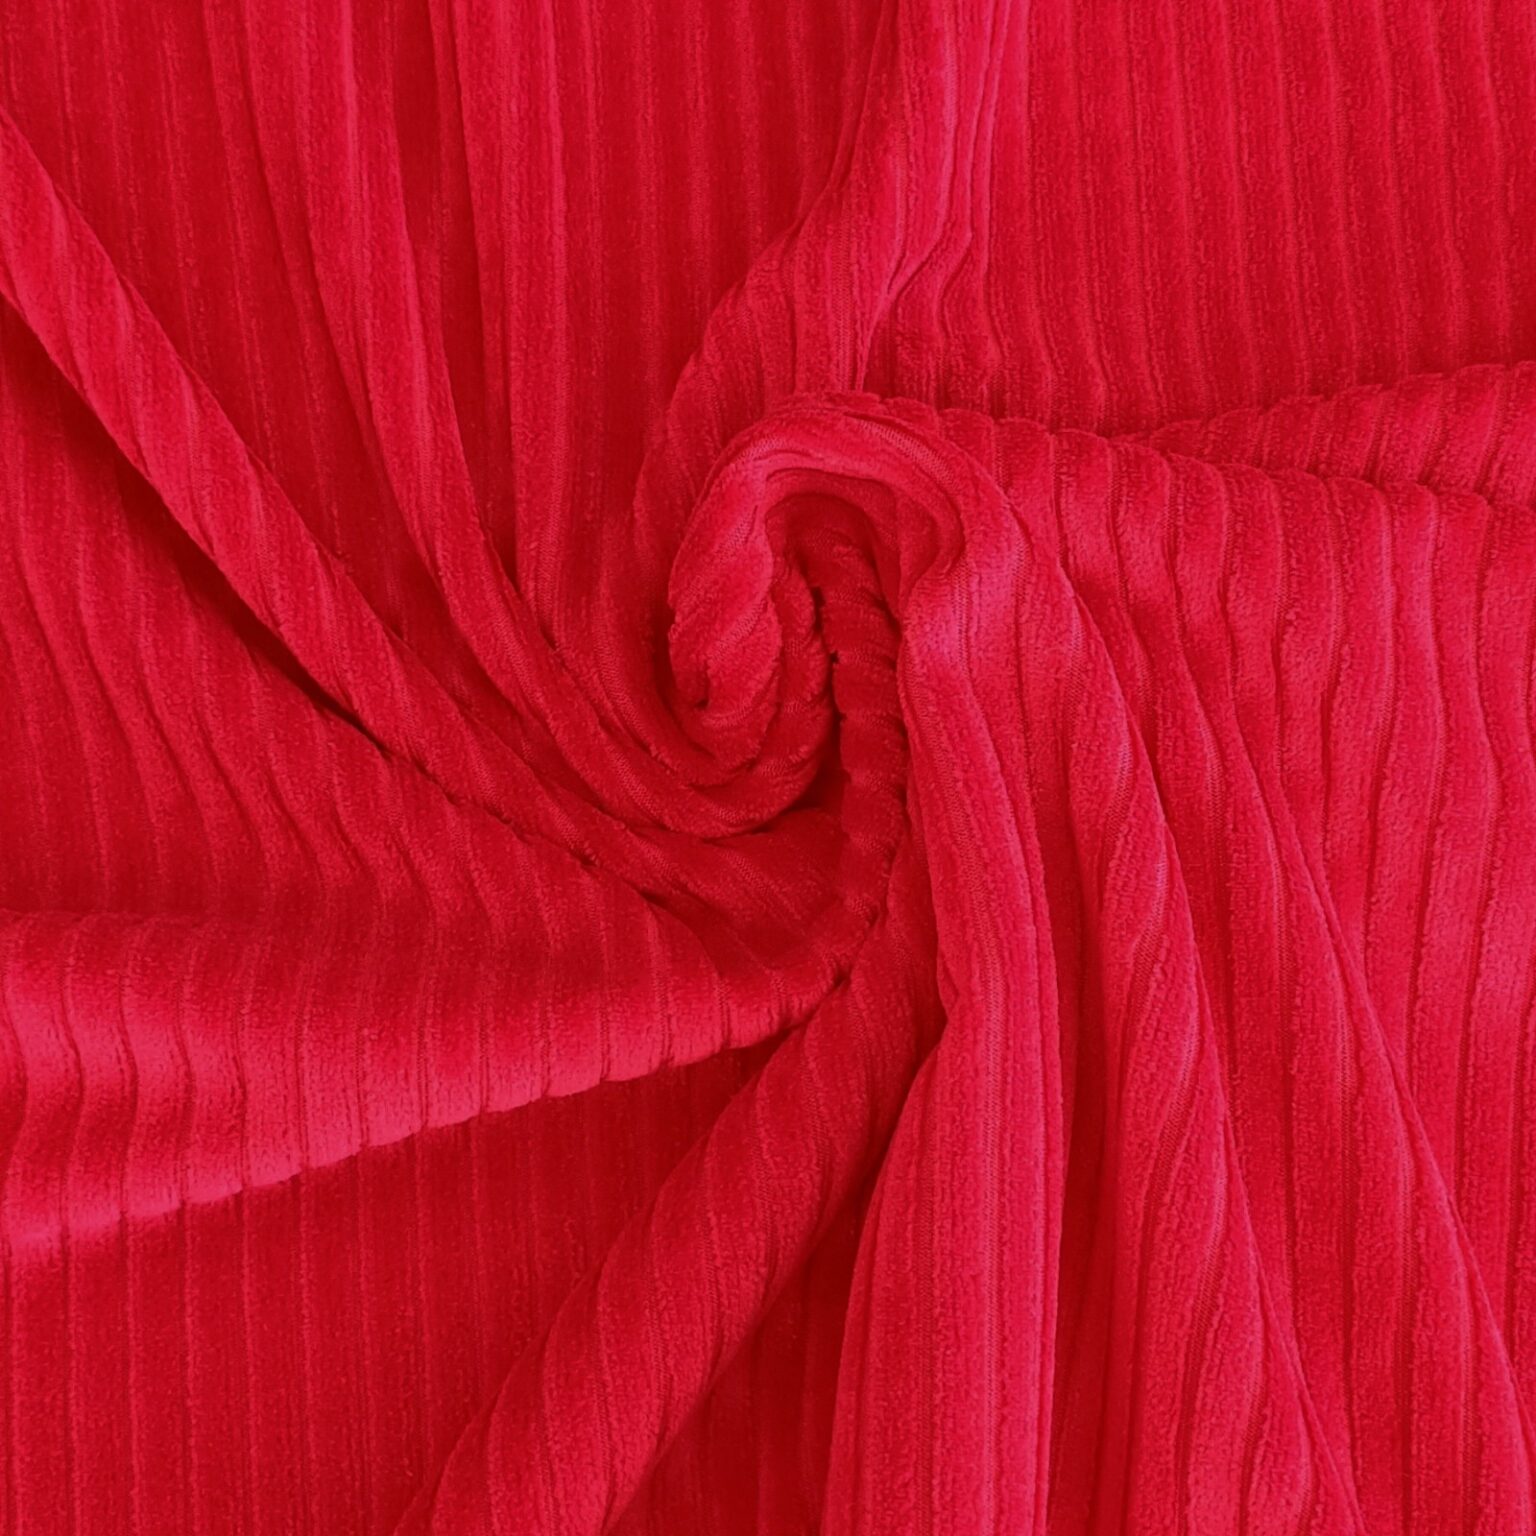 Nicky Jumbo Cord Jersey Fabric - Red - 150cm Wide at More Sewing